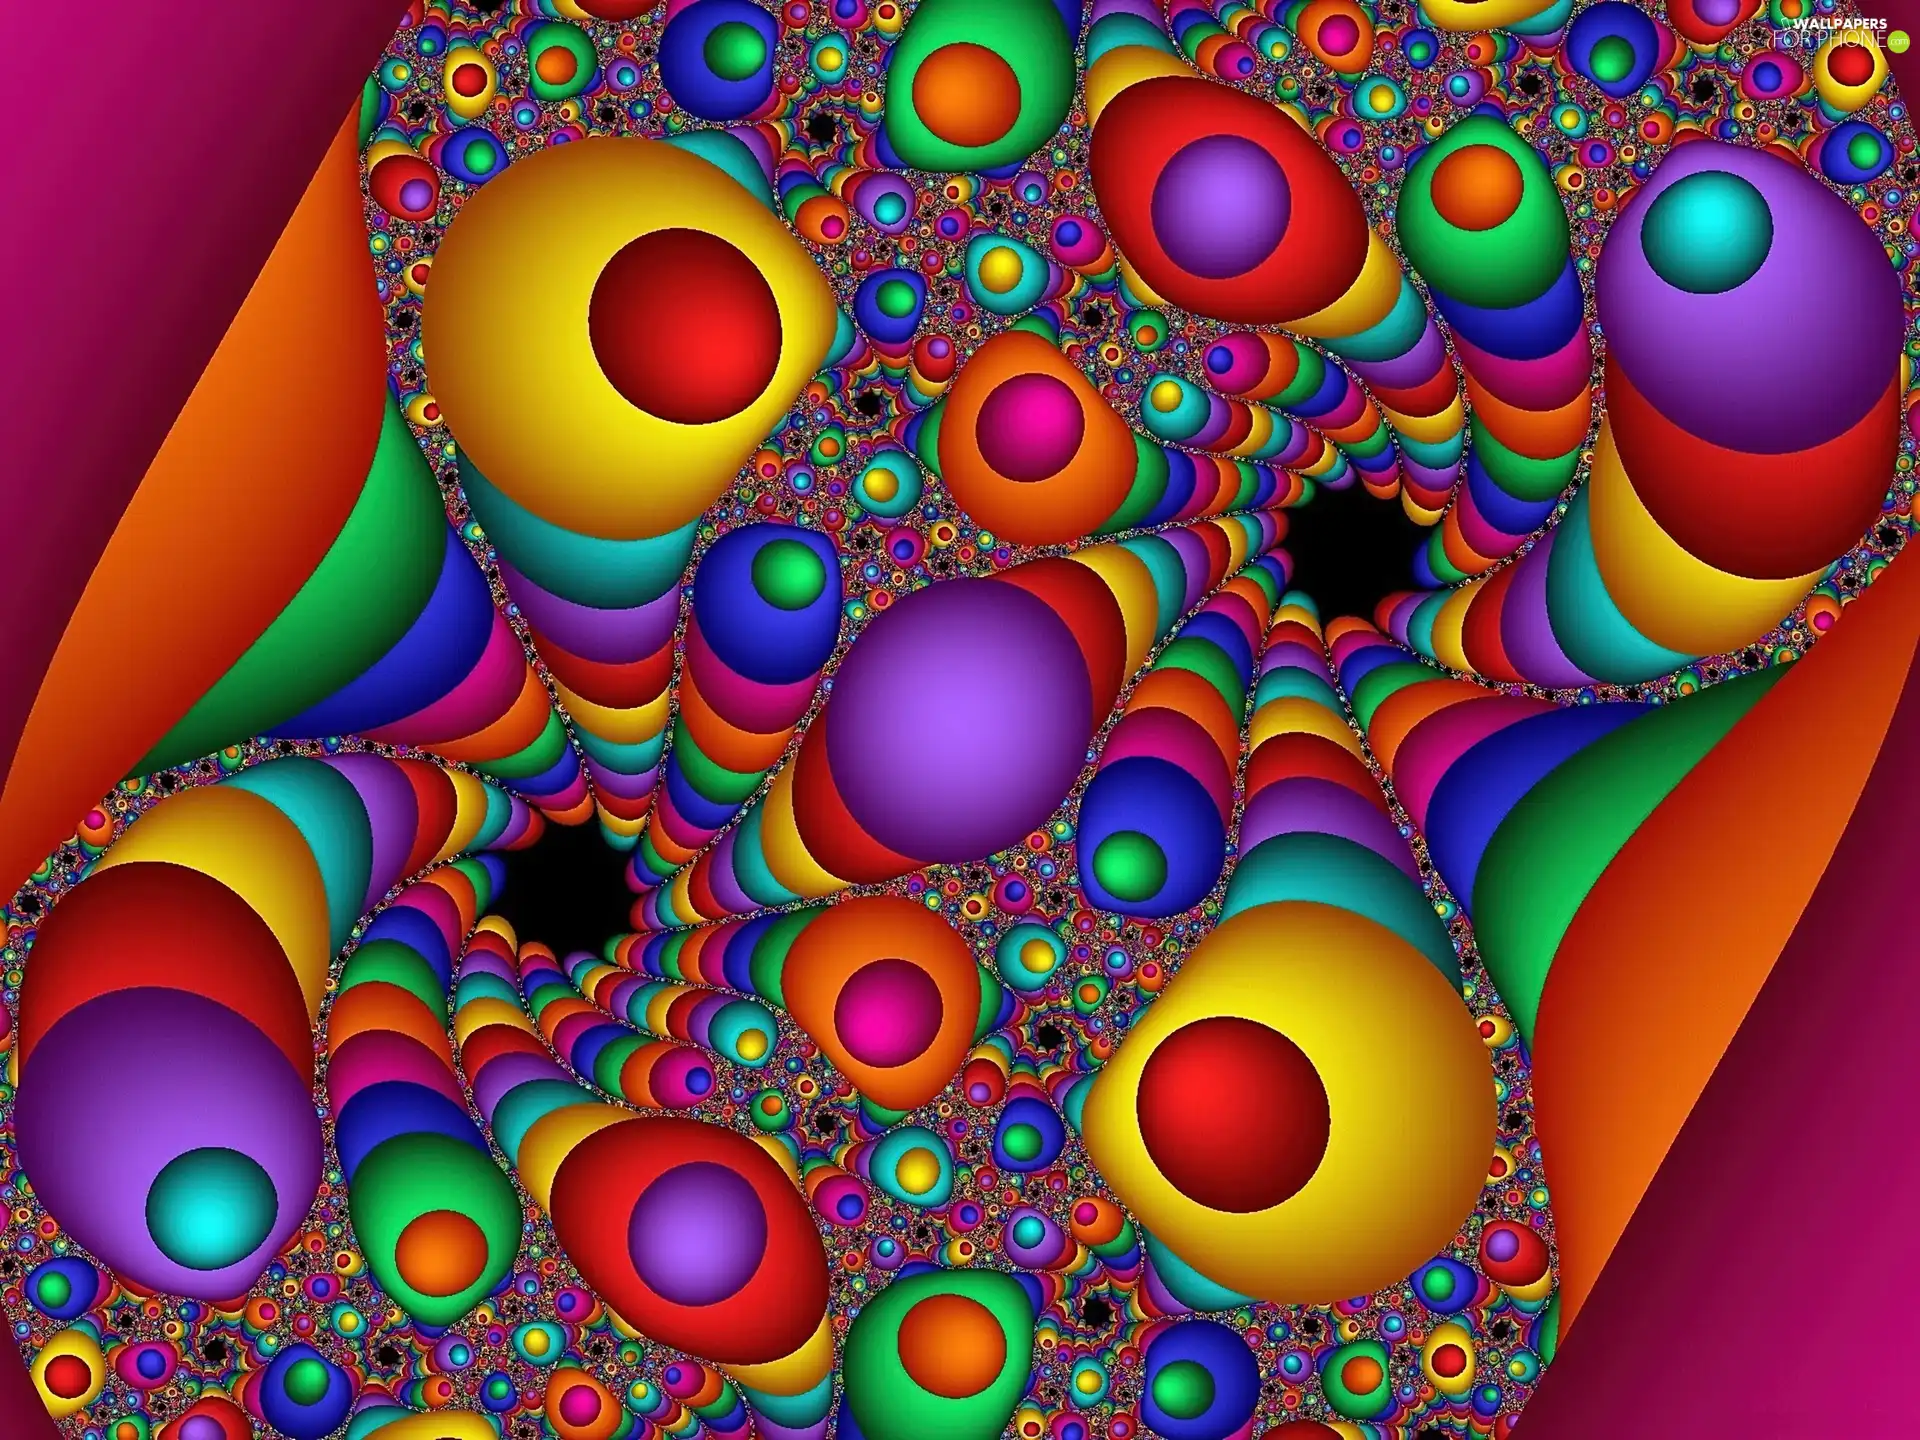 Kaleidoscope, abstraction, graphics, colors